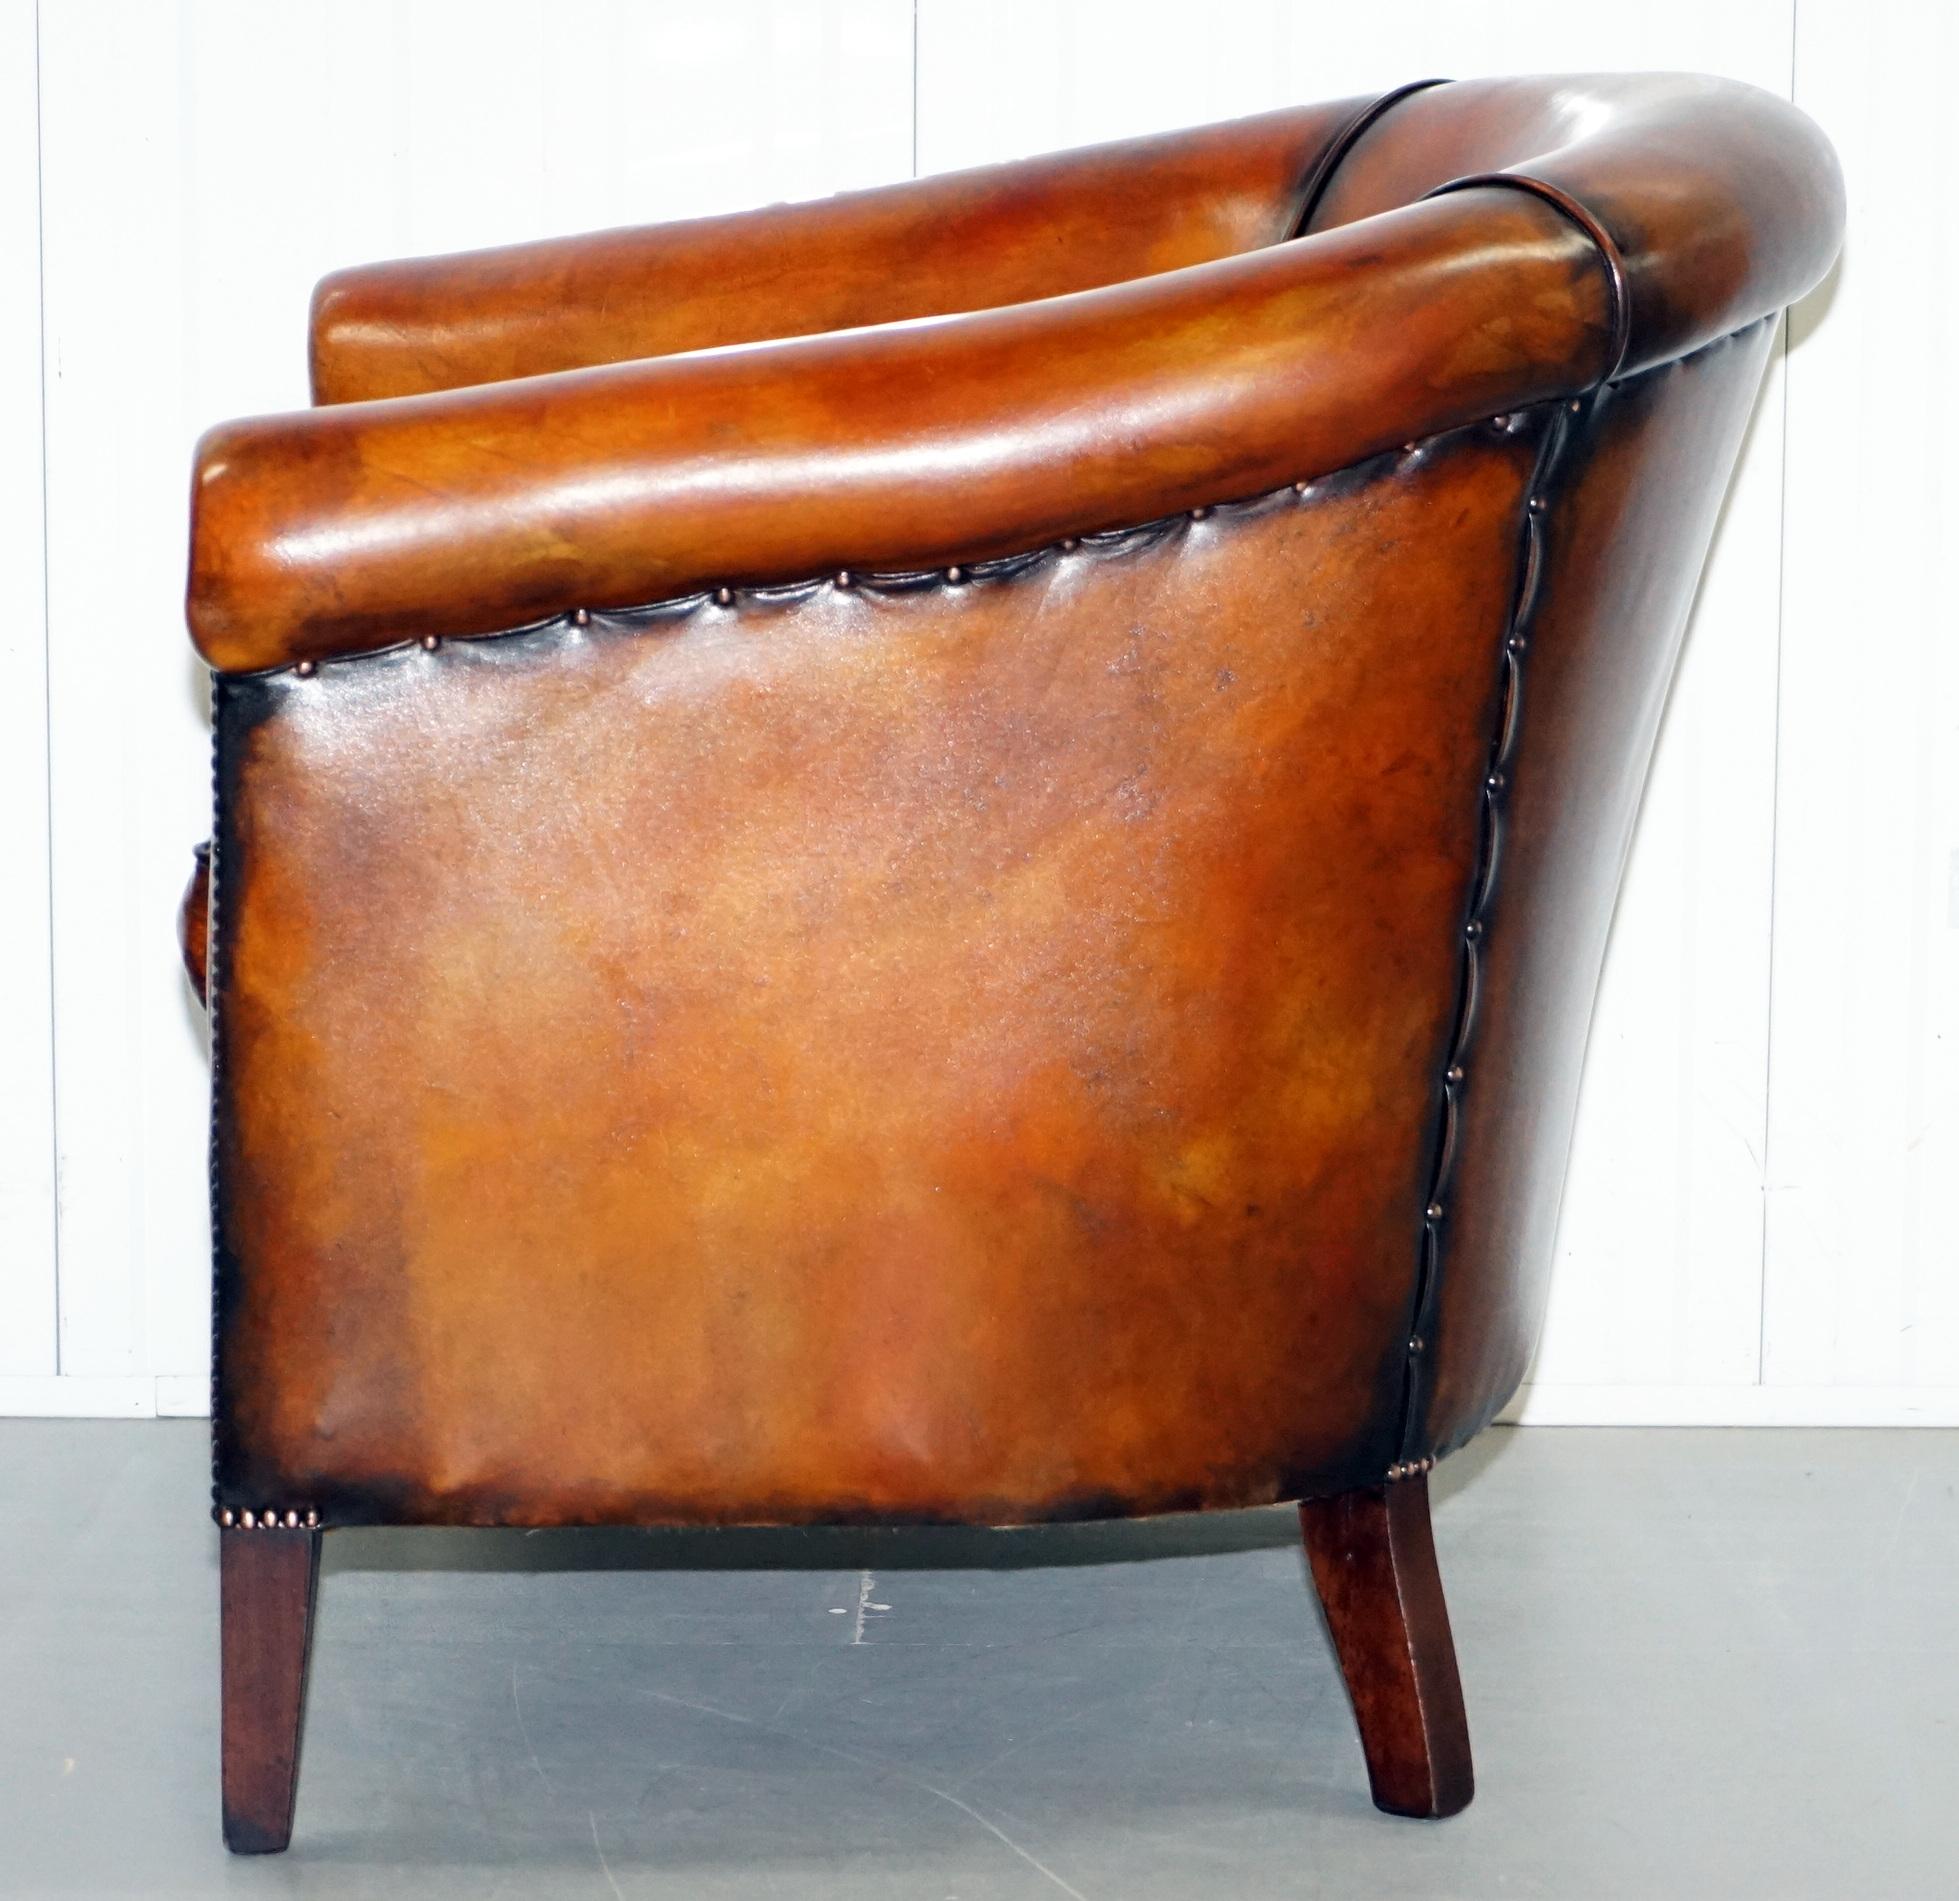 James Bond 007 Armchair from Spectre Leather Chairs of Bath Fully Restored 10